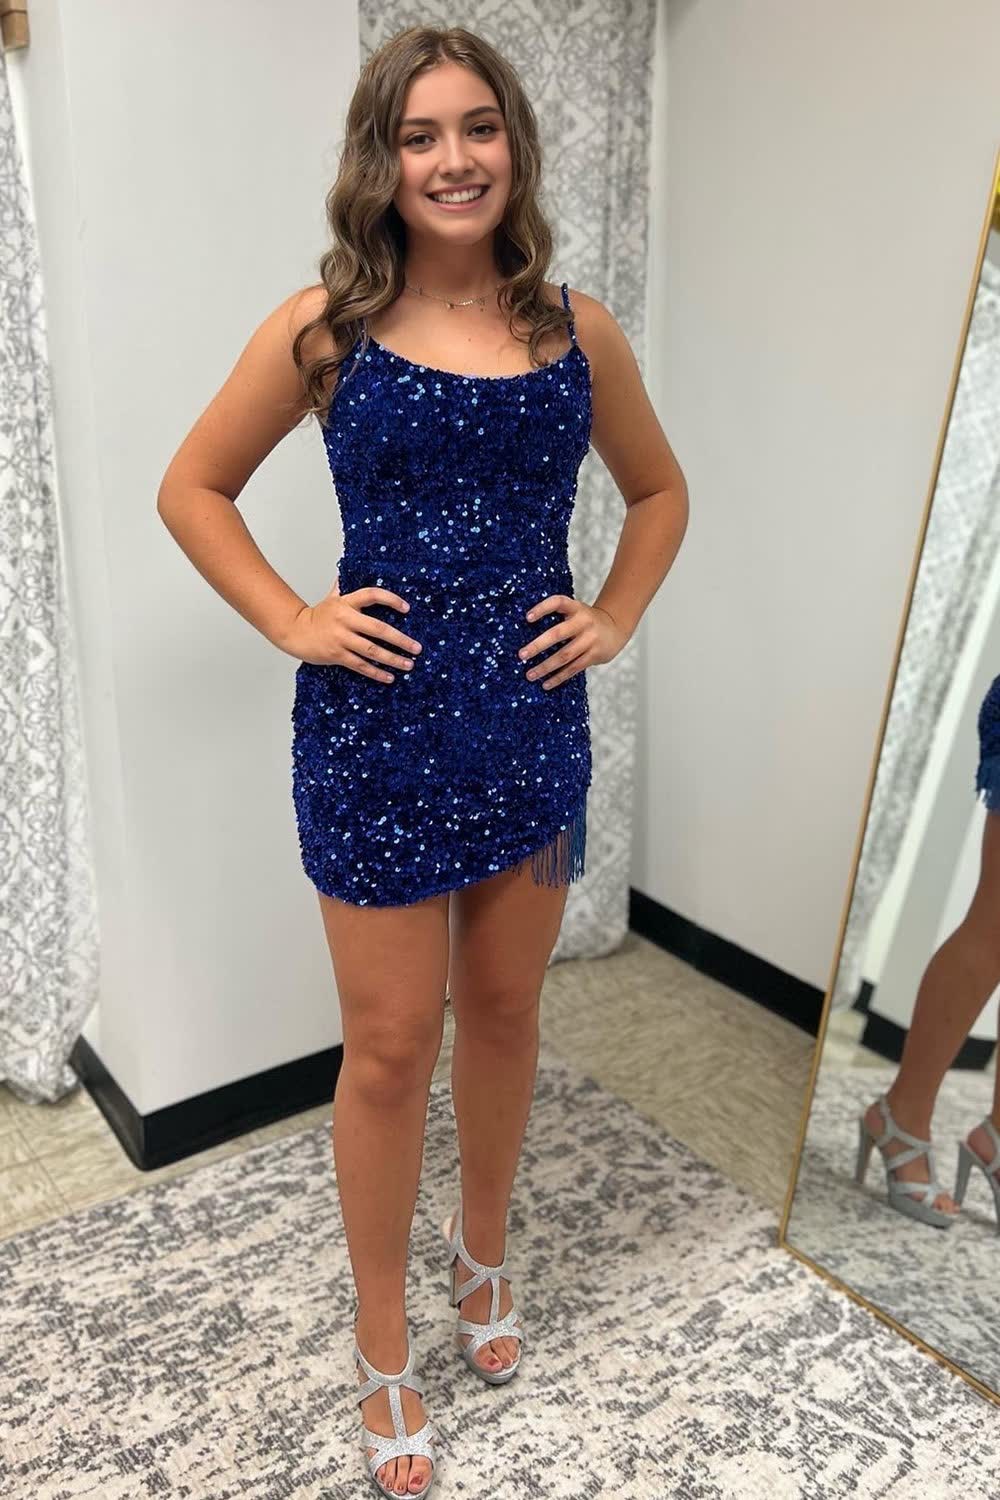 Royal Blue Sequined Tight Corset Homecoming Dress with Fringes outfit, Royal Blue Sequined Tight Homecoming Dress with Fringes